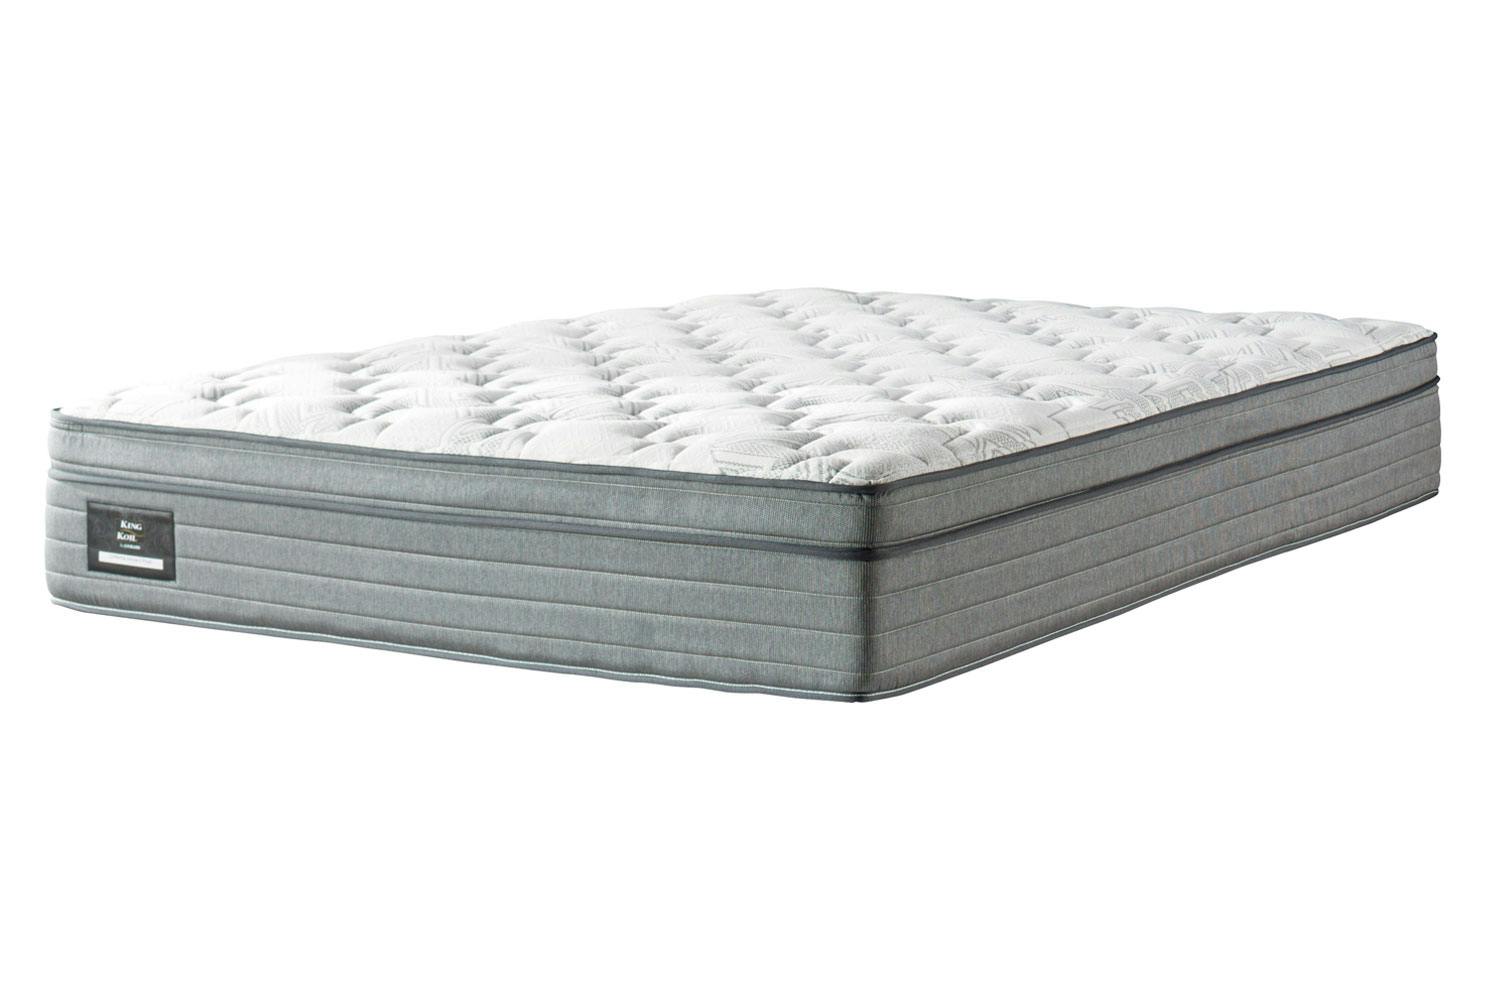 Conforma Deluxe II Soft King Mattress by King Koil